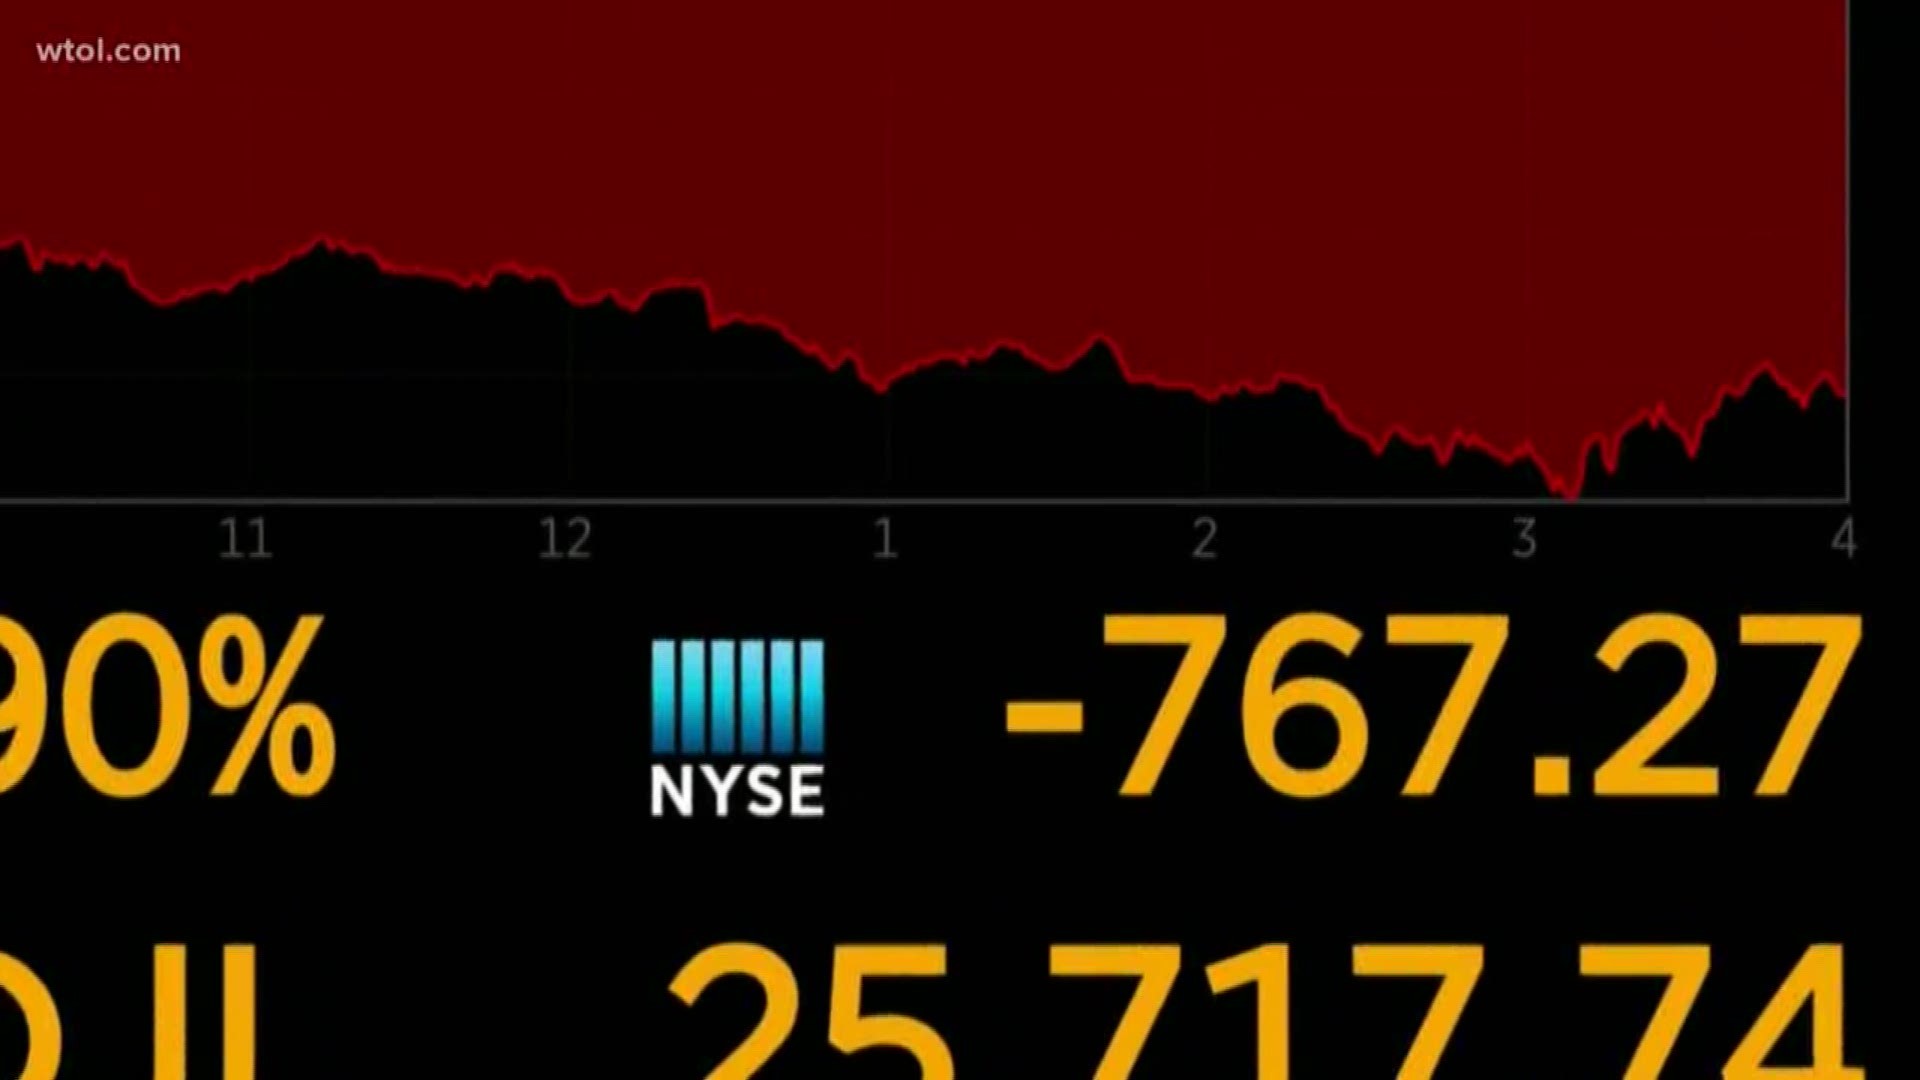 On Monday, the Dow dropped 737 points. But on Tuesday, it went up 311 points.